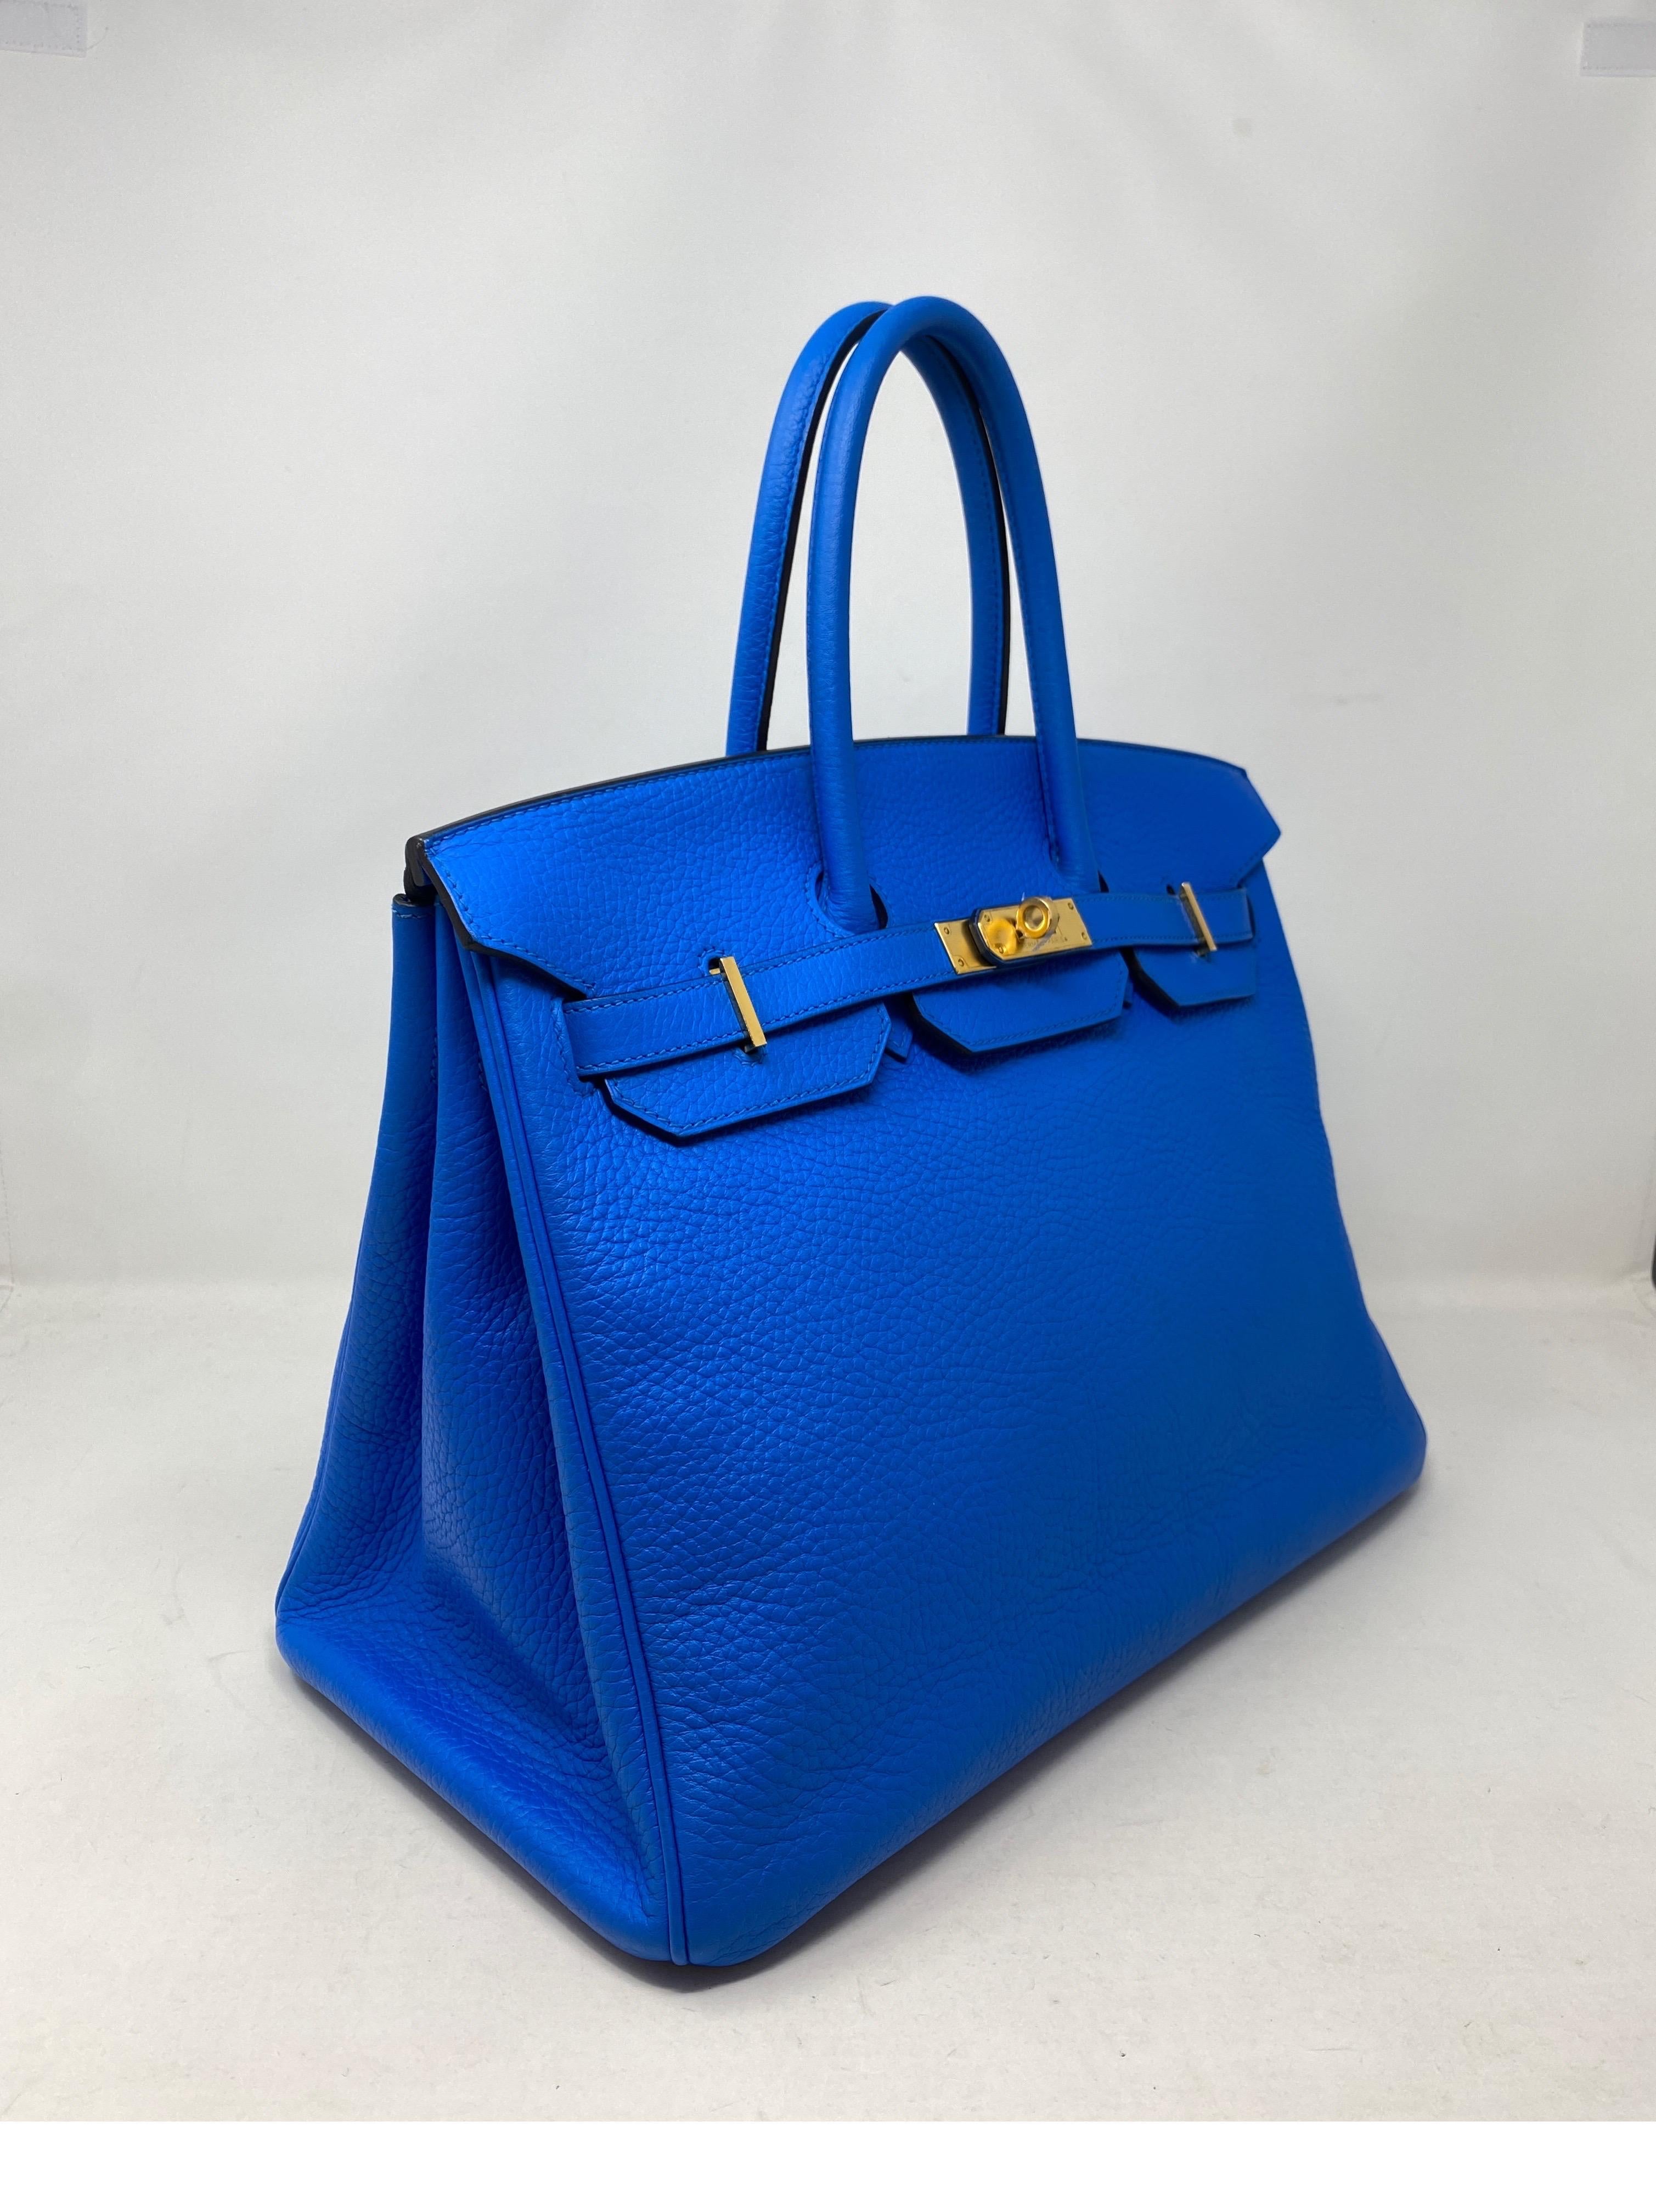 Hermes Birkin Blue Hydra 35 Bag. Gold hardware. Excellent condition. Looks like new bag. Gorgeous and gift ready. Includes clochette, lock, keys, and dust cover. Guaranteed authentic. 